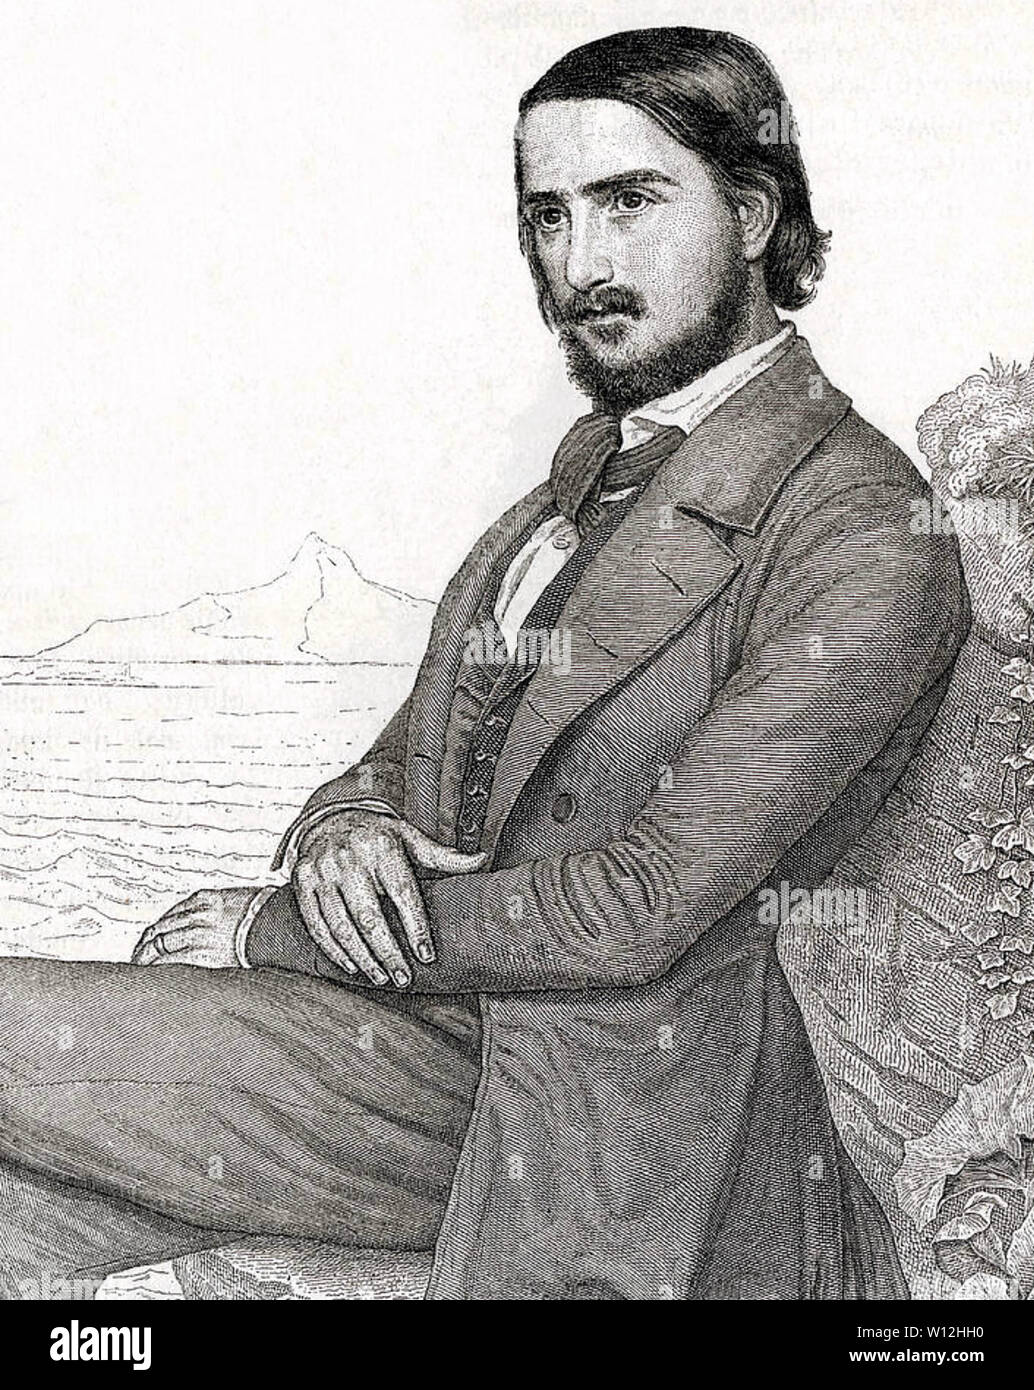 GEORG HERWEGH (1817-1875) poète allemand Banque D'Images